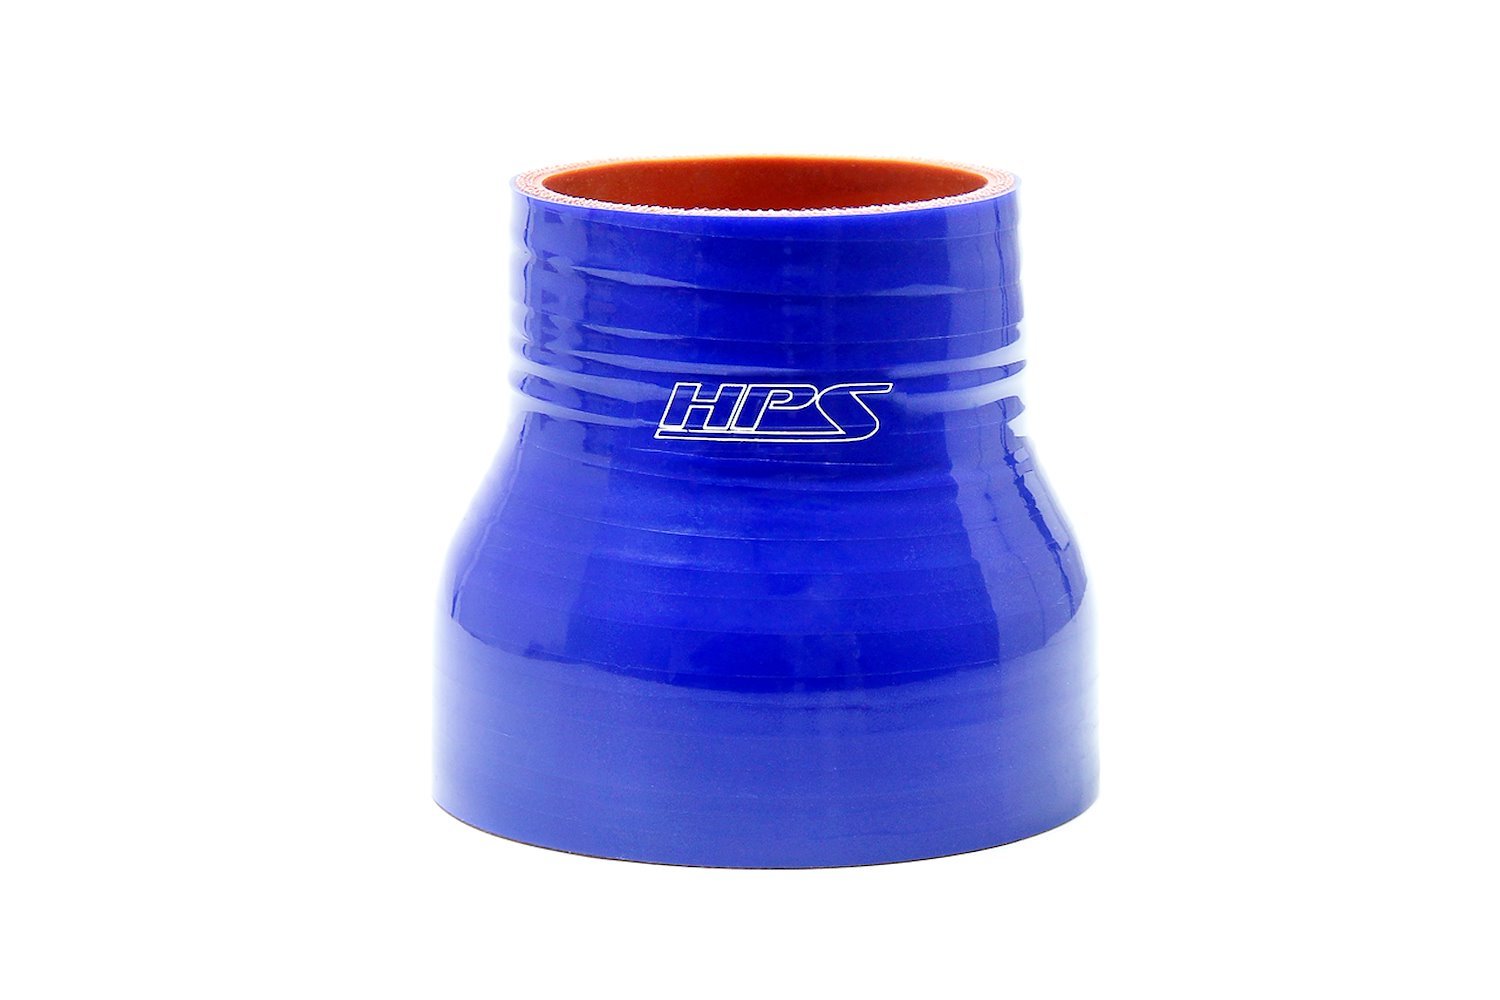 HTSR-175-238-BLUE Silicone Reducer Hose, High-Temp 4-Ply Reinforced, 1-3/4 in. - 2-3/8 in. ID, 3 in. Long, Blue